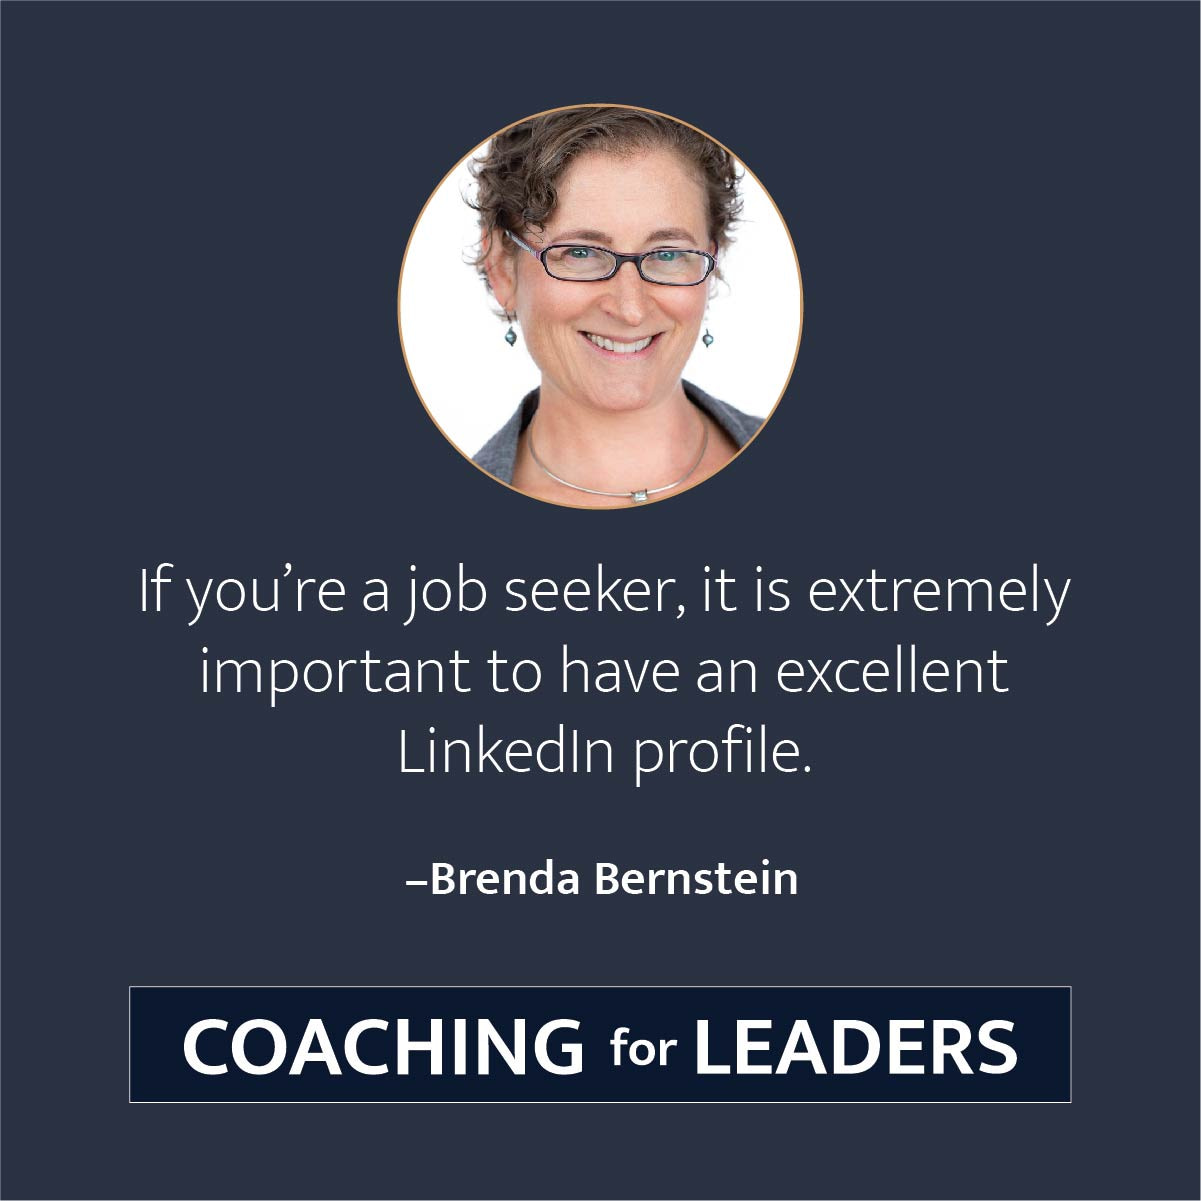 If you're a job seeker, it is extremely important to have an excellent LinkedIn profile.